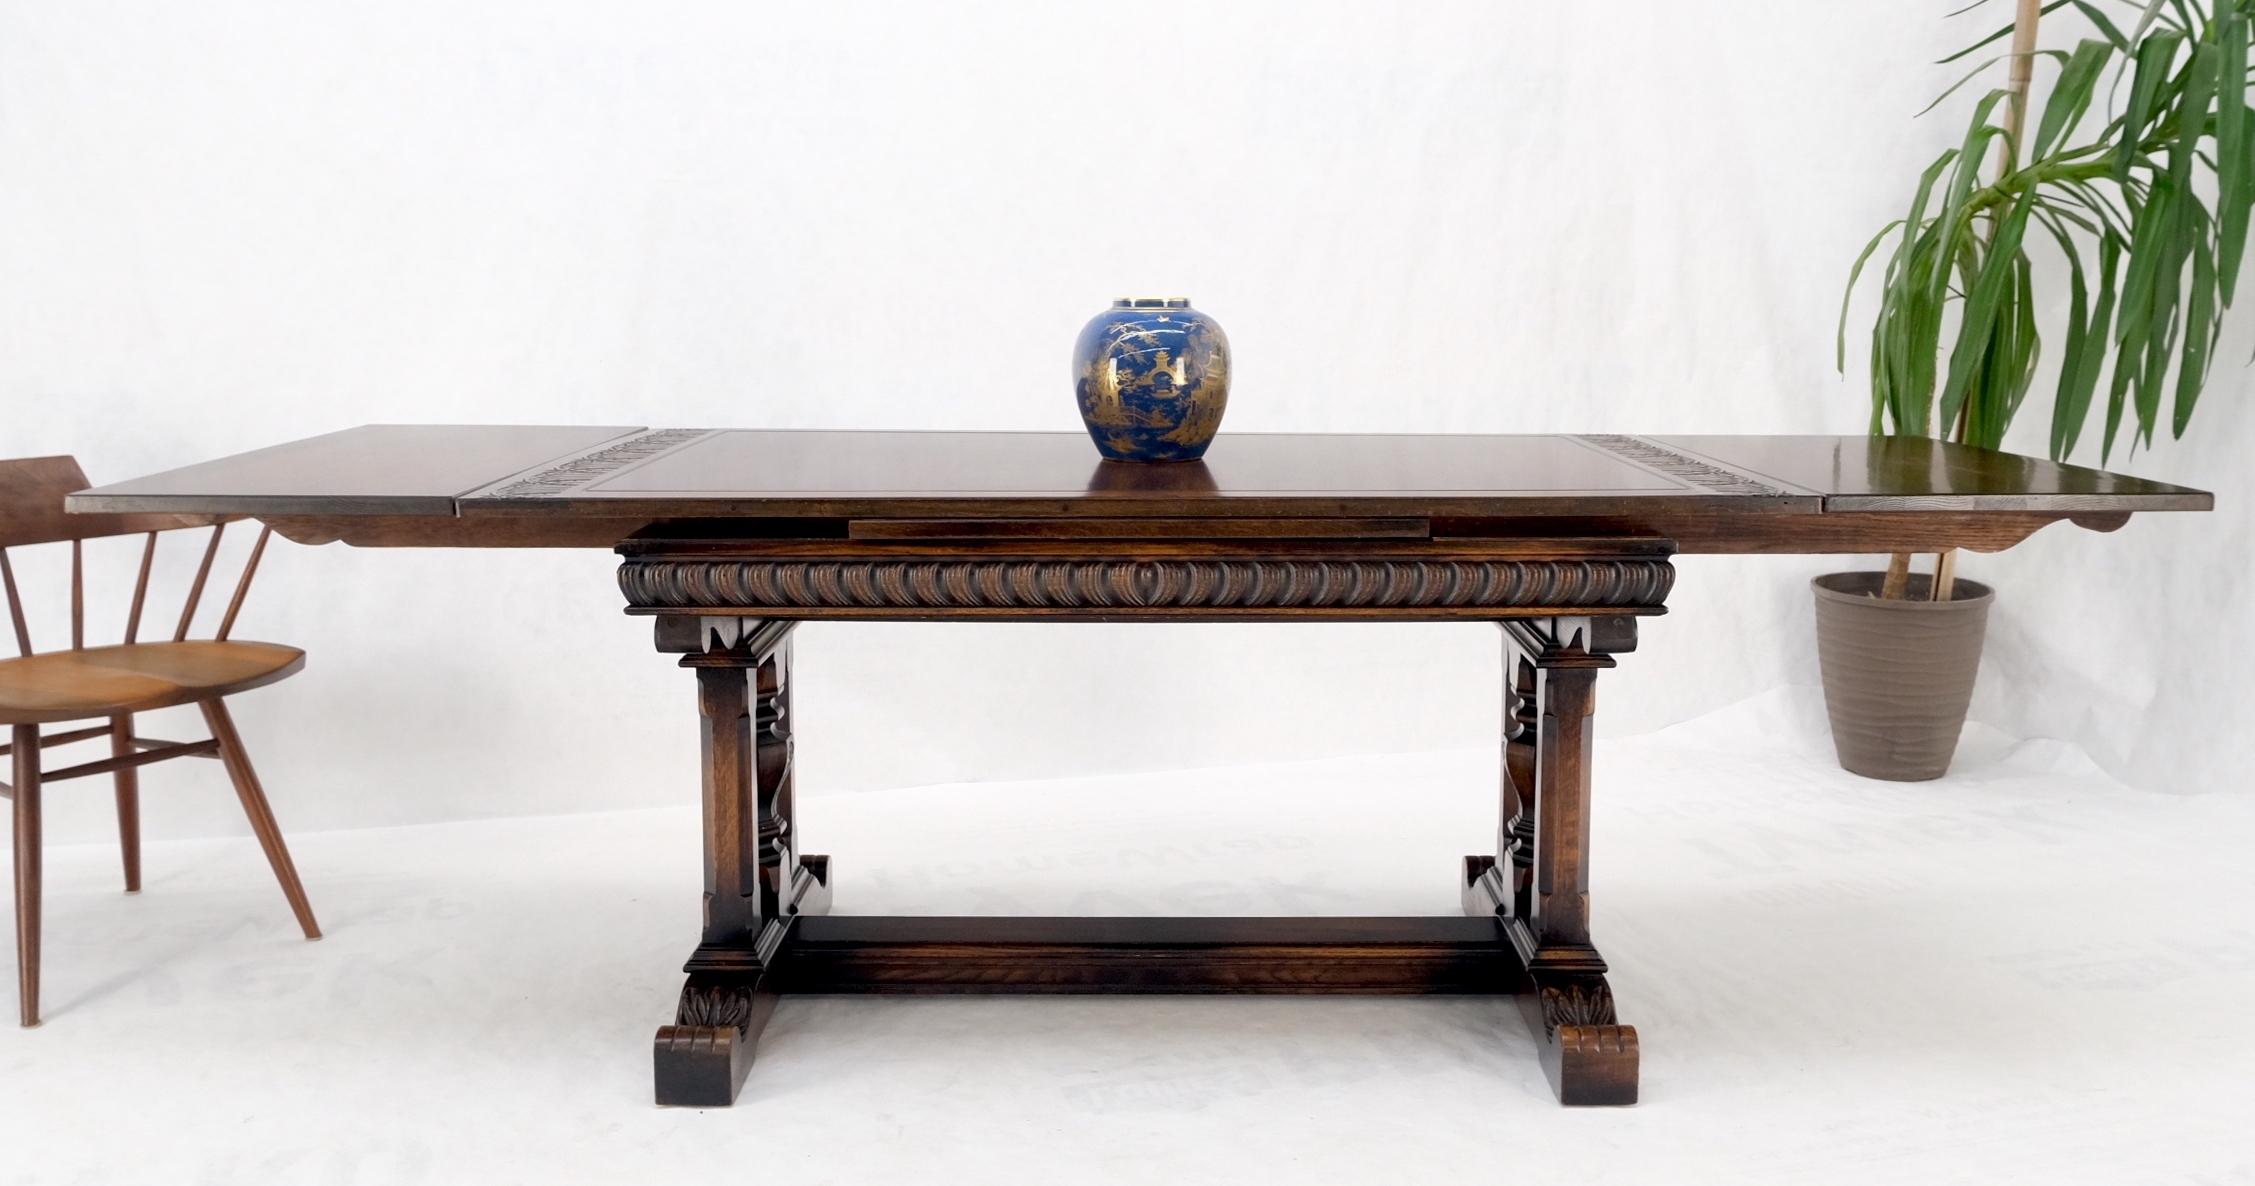 Carved Oak Jacobean Style Refectory Trestle Base Dining Farm Table MINT!
two leaves measuring 18 inches in width.